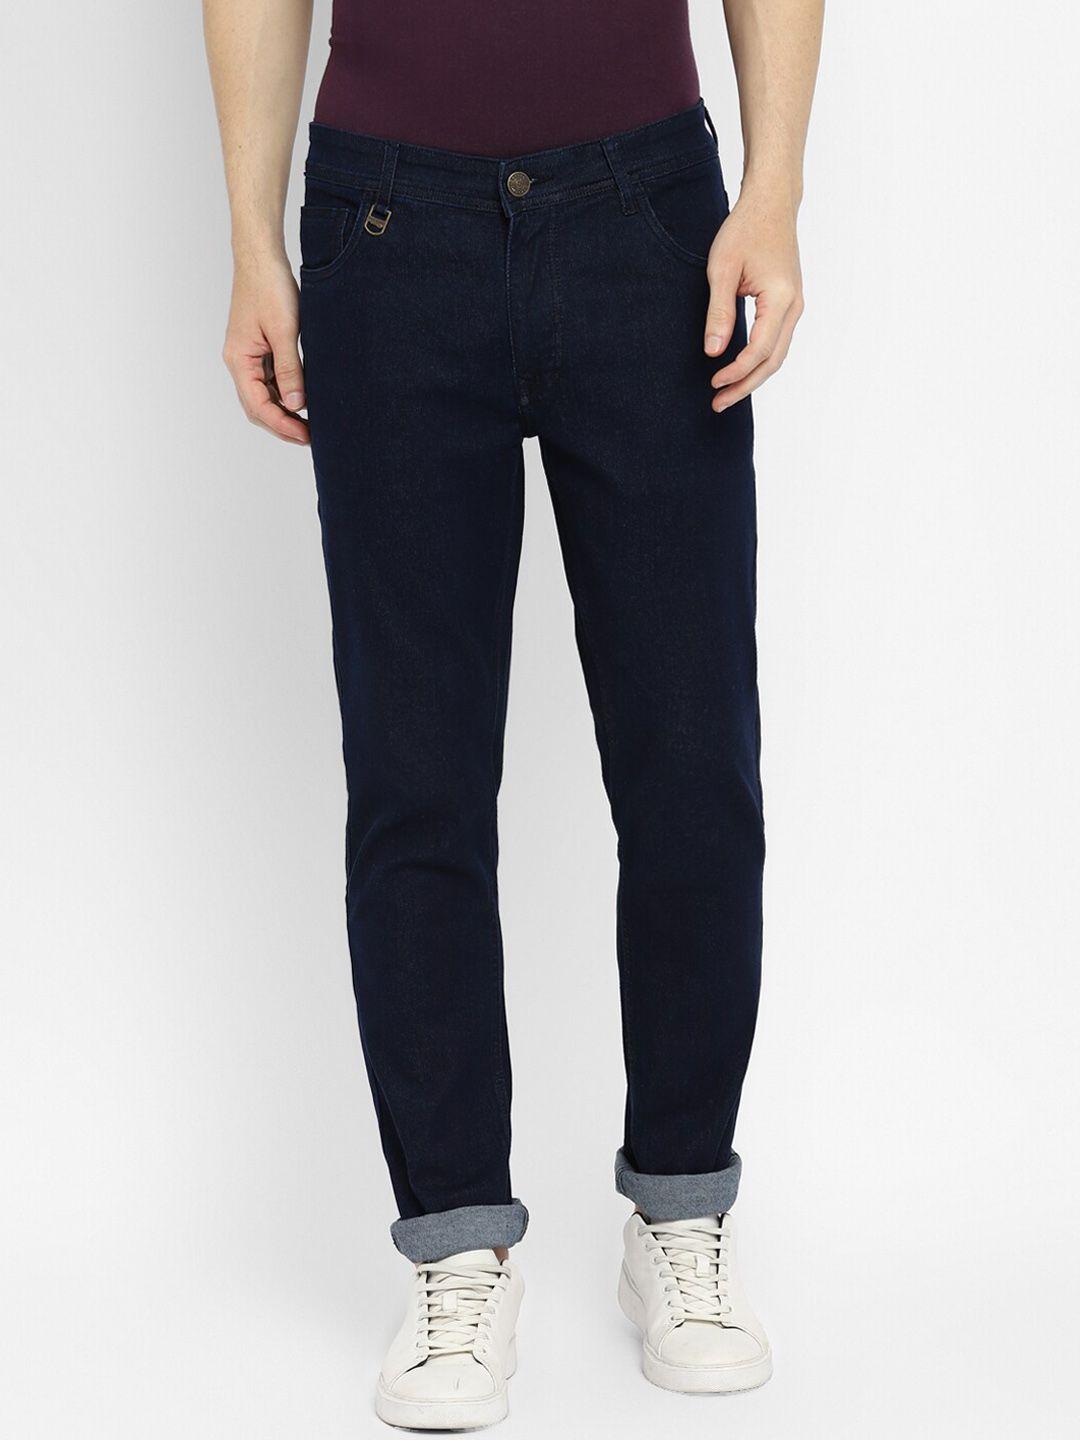 red-chief-men-navy-blue-stretchable-jeans